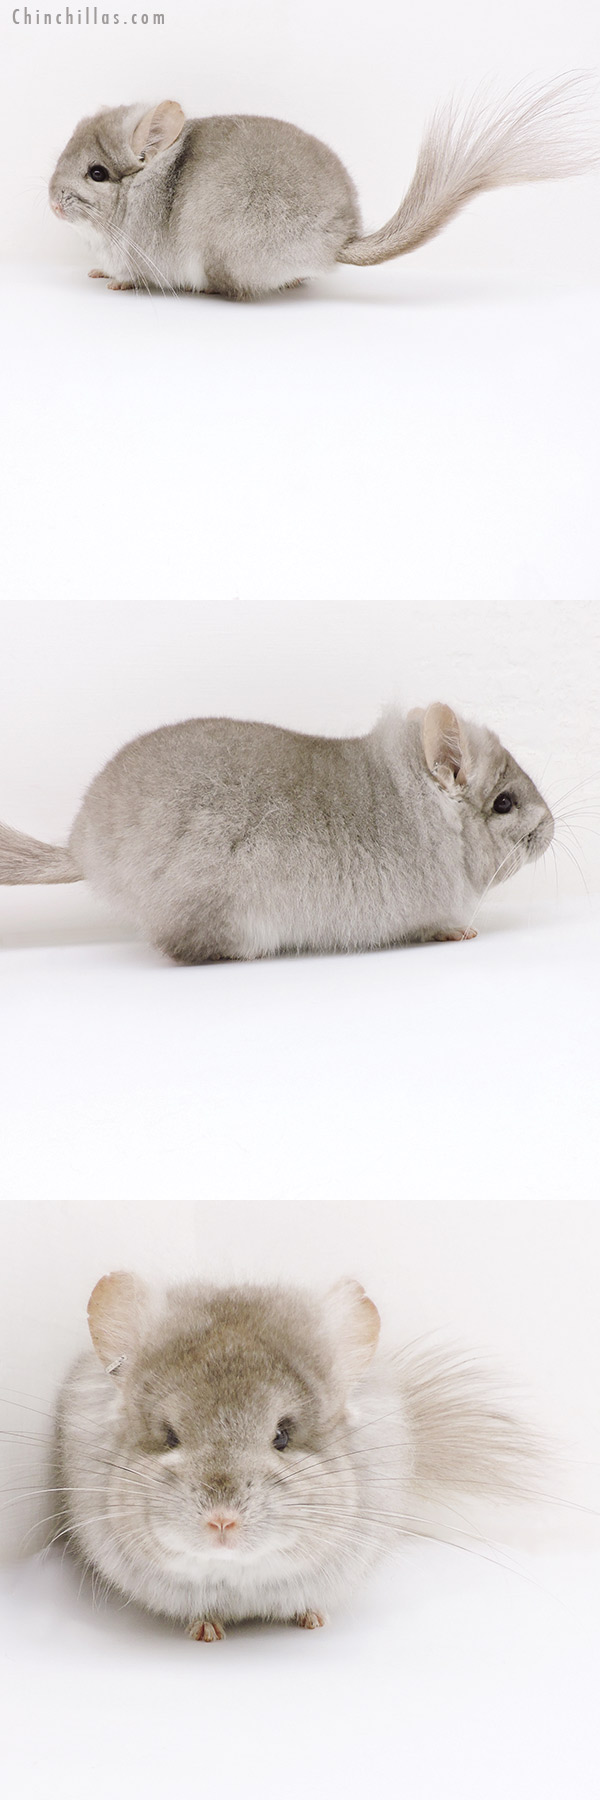 Chinchilla or related item offered for sale or export on Chinchillas.com - 19192 Exceptional Beige  Royal Persian Angora Male Chinchilla with Lion Mane